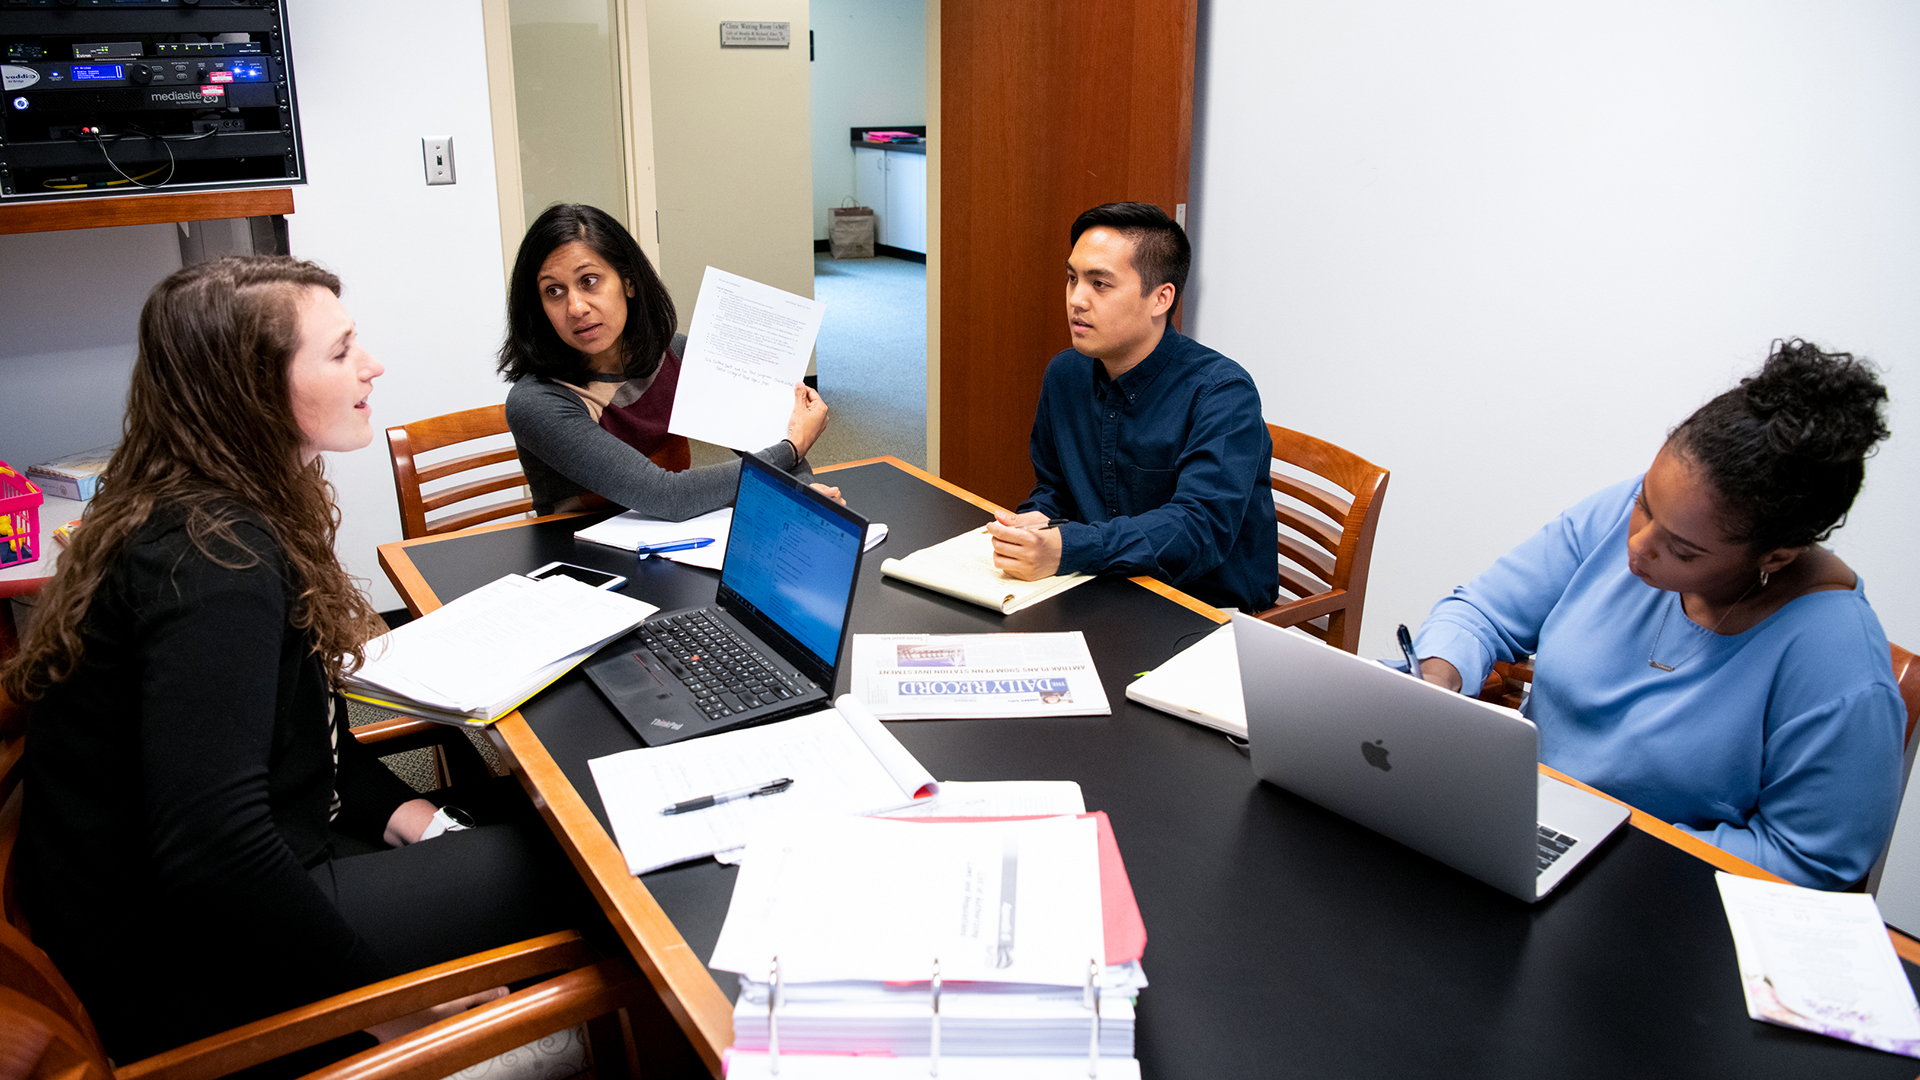 Environmental Law Clinic Concludes Fall 2019 Semester